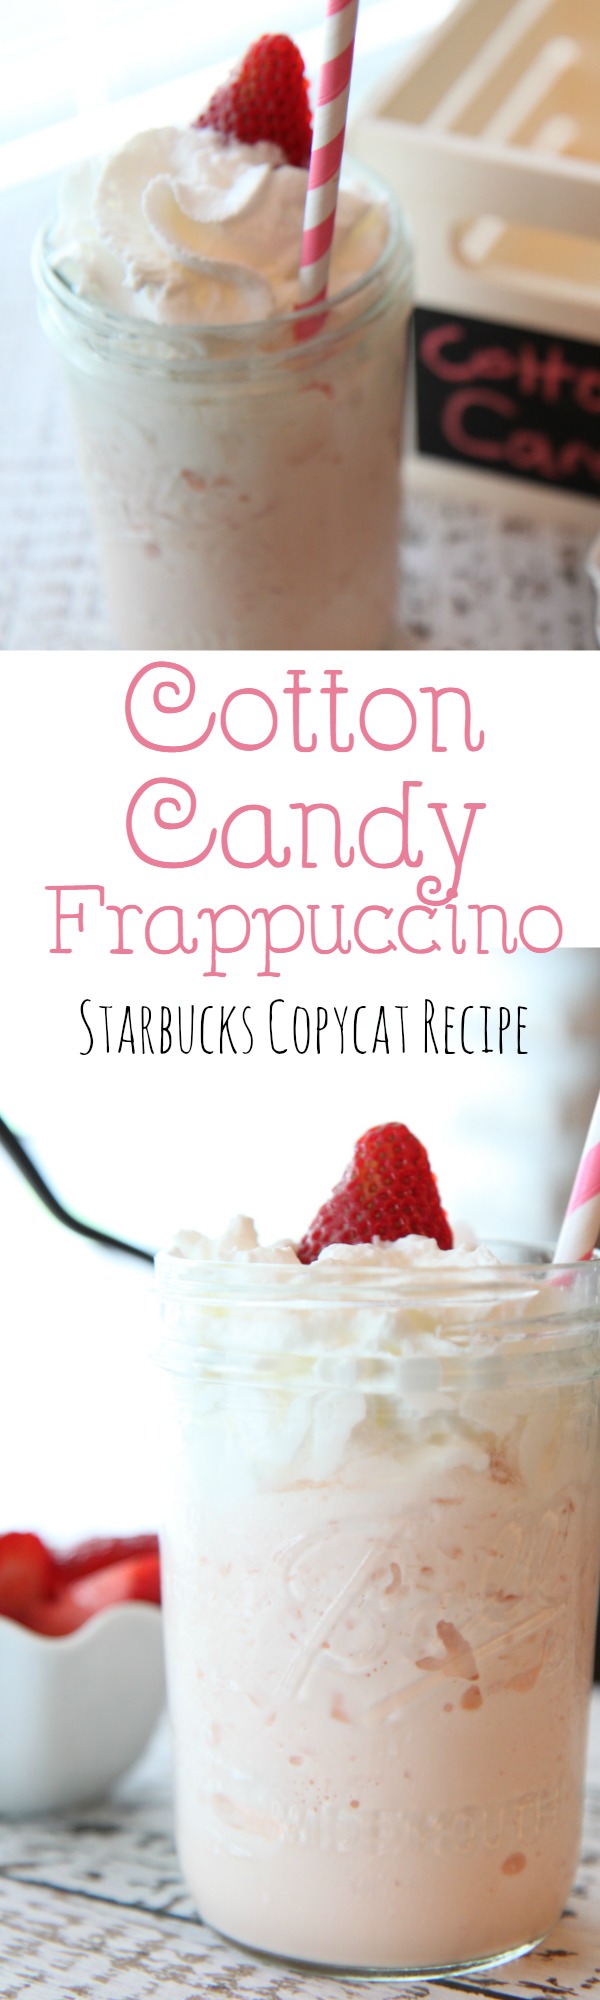 The Cotton Candy Frappuccino from the secret Starbucks menu is easy to make at home. It is just as delicious at a fraction of the price.